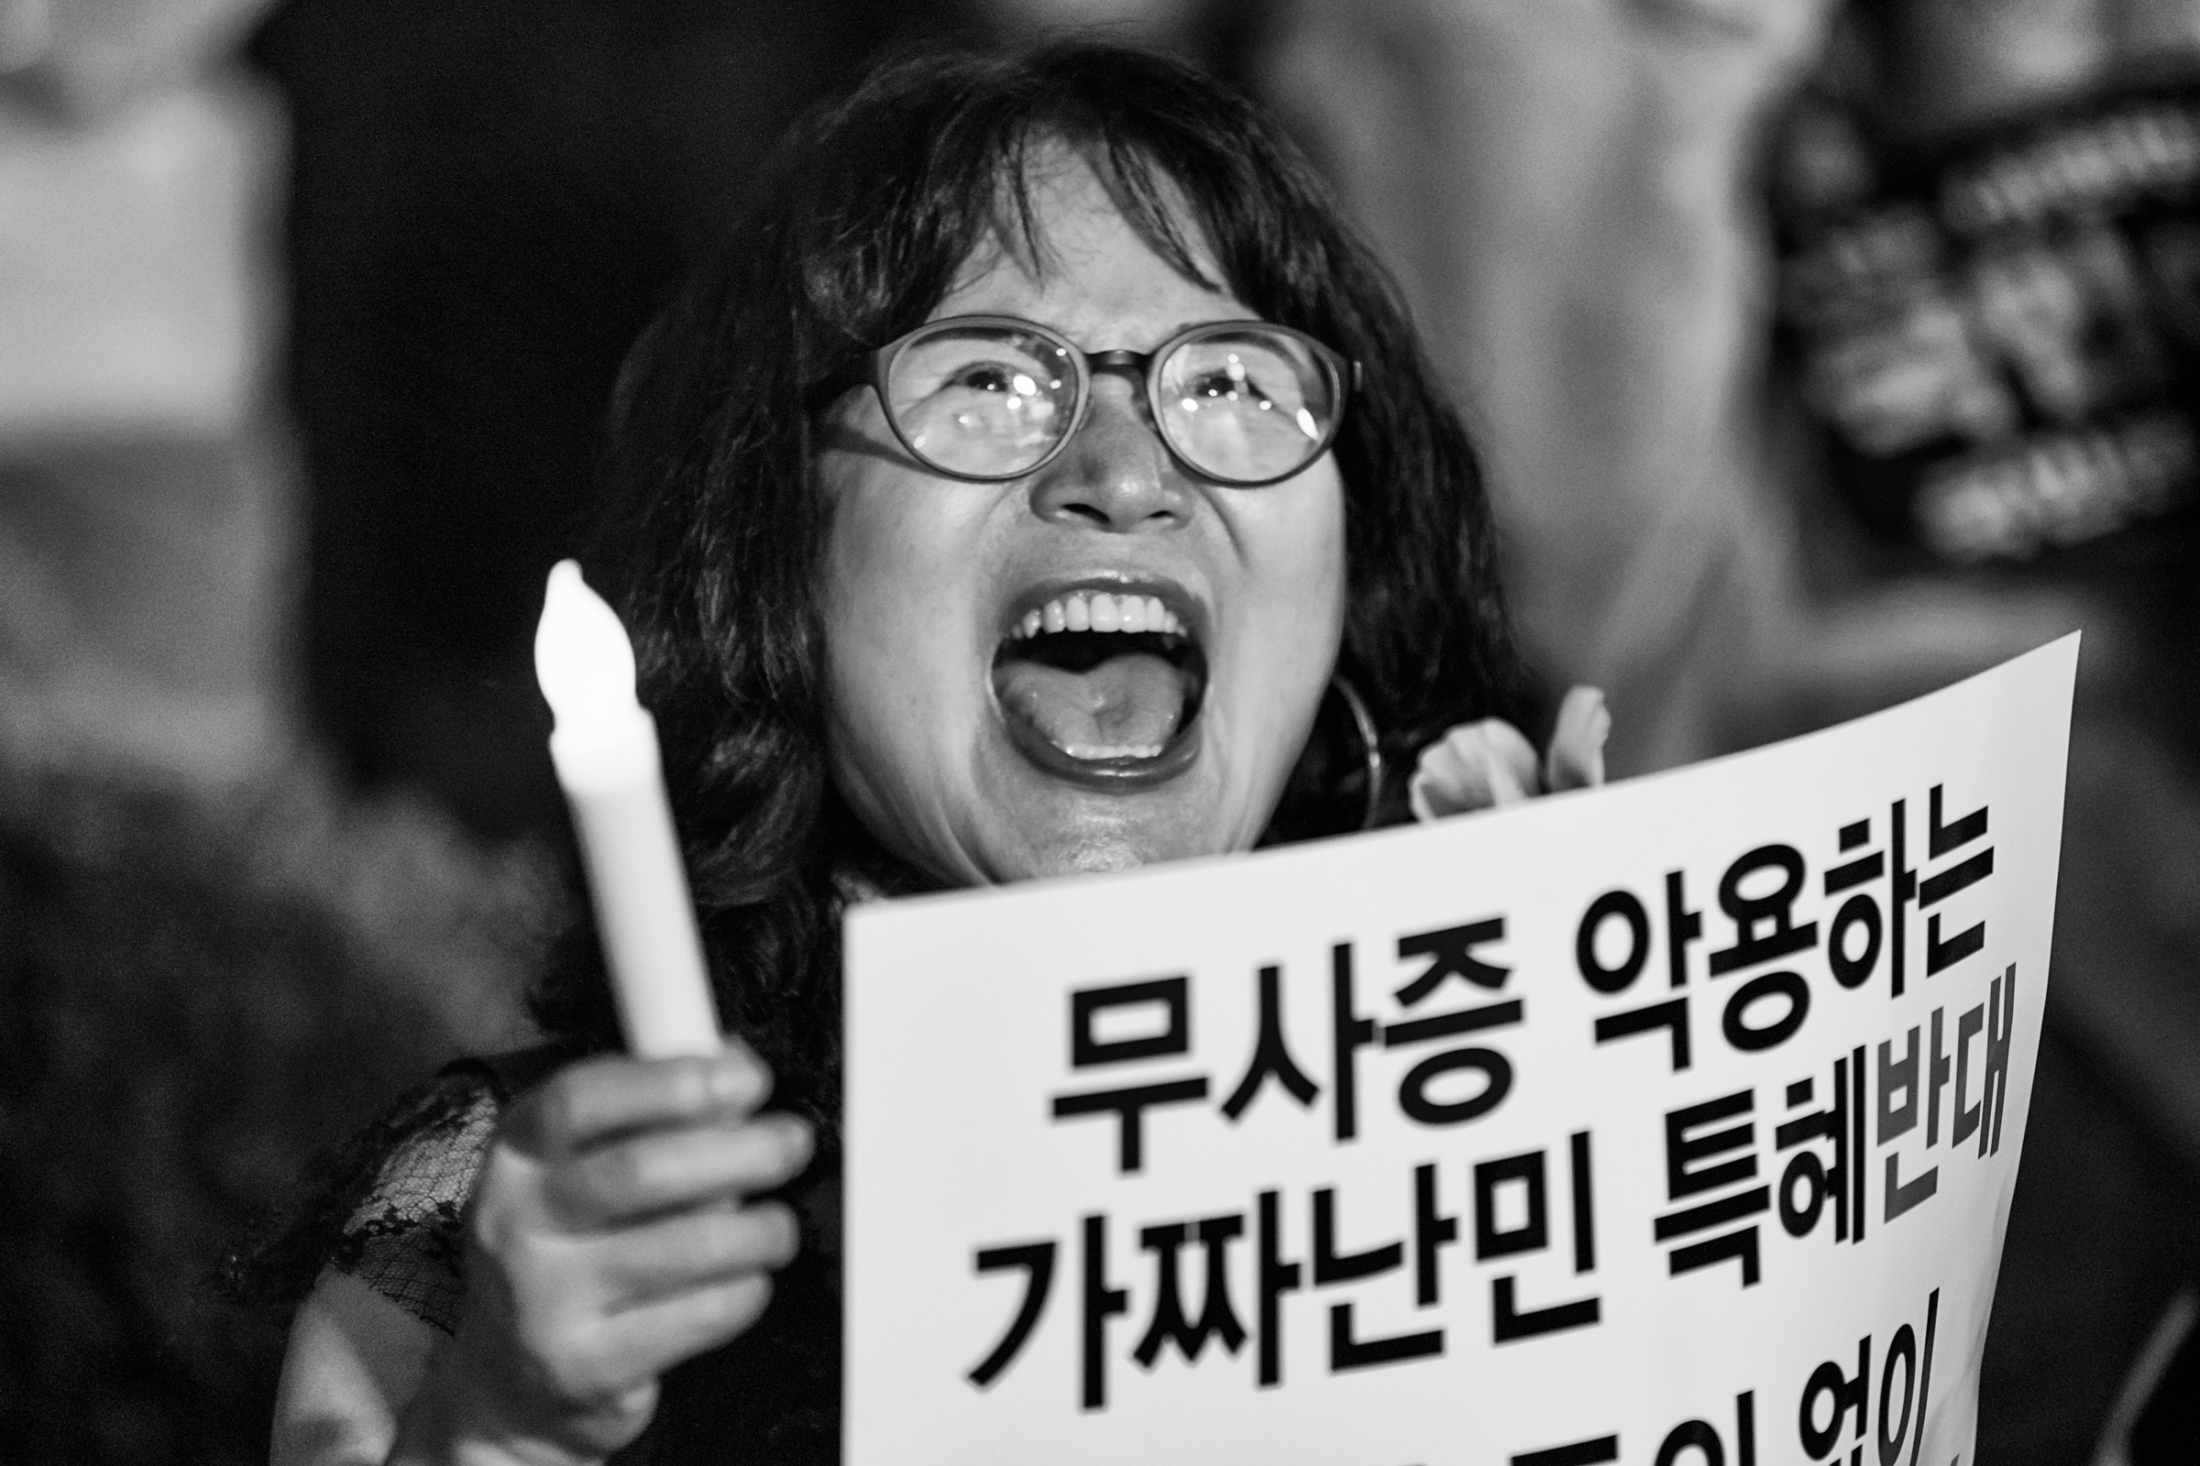 The Visitors from 8,000km Away -   The protesters chant many messages like "Koreans...